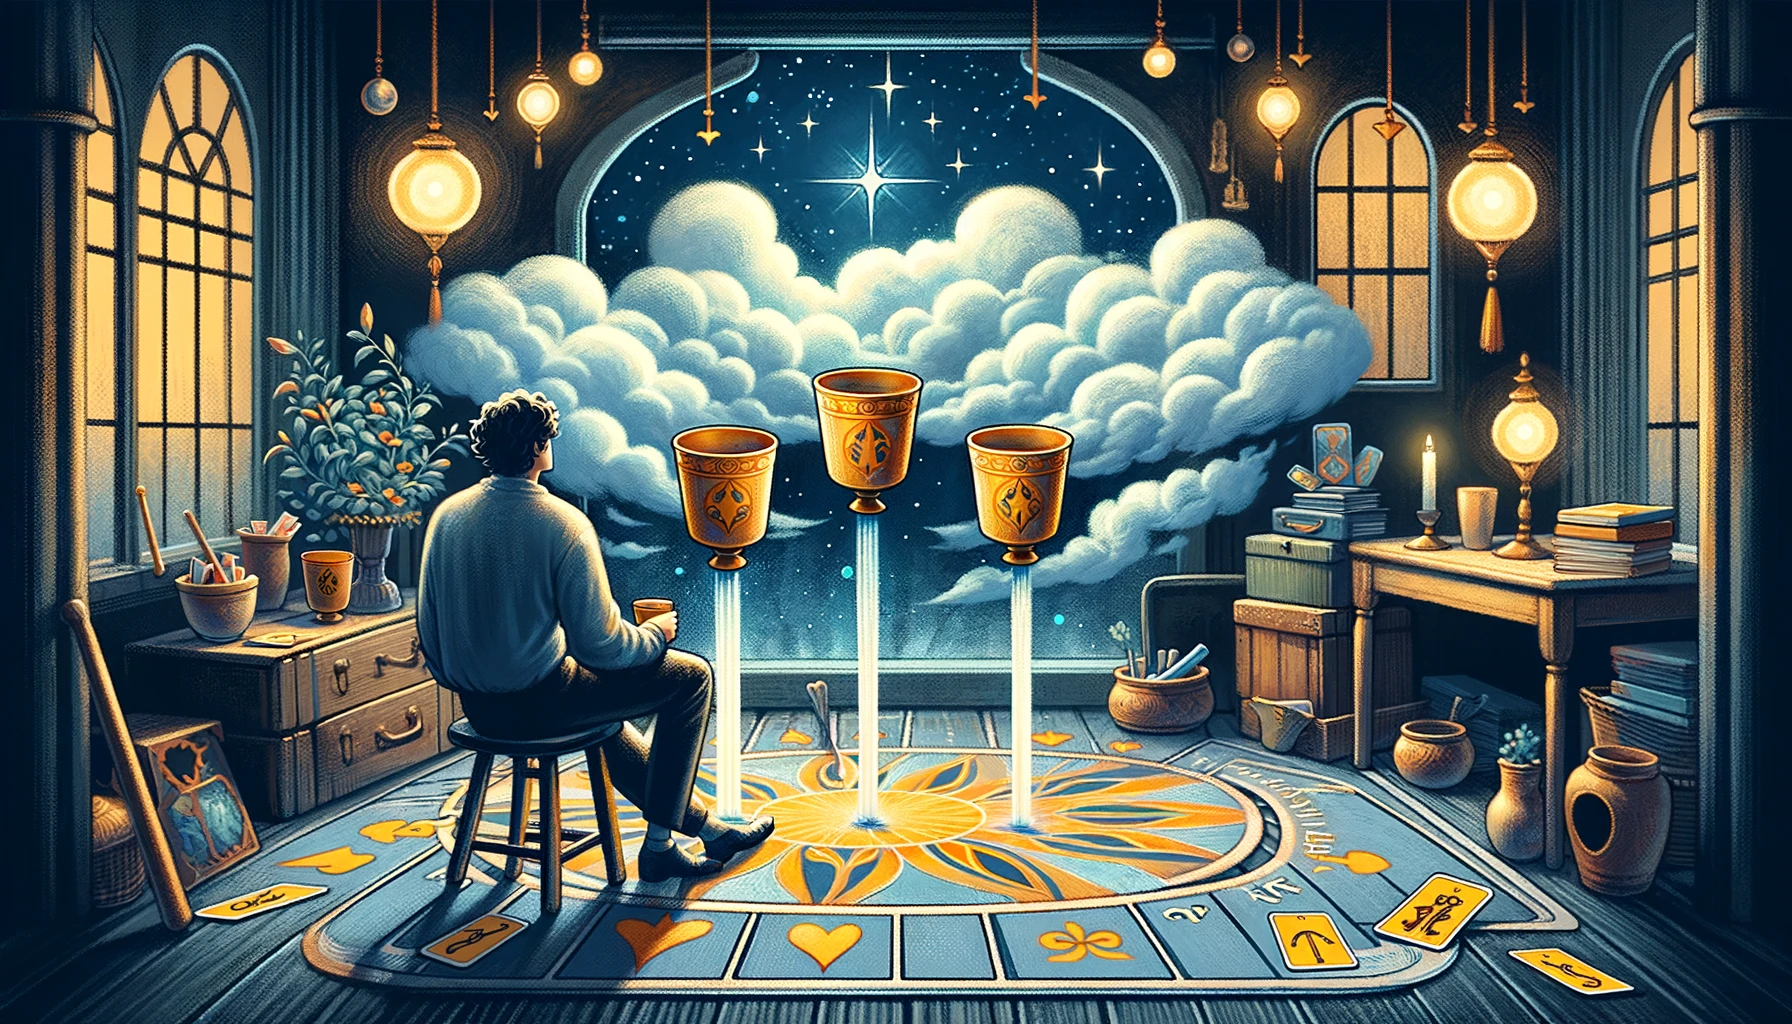 "Artwork depicting a person in contemplation, surrounded by three cups symbolizing indifference to current offers, while a fourth cup is presented from a cloud, signifying an overlooked opportunity. The setting suggests introspection and missed connections, hinting at the need for awareness and openness to change. Despite initial reluctance, hints of realization and potential for embracing new prospects are depicted, suggesting the possibility of a shift in perspective."